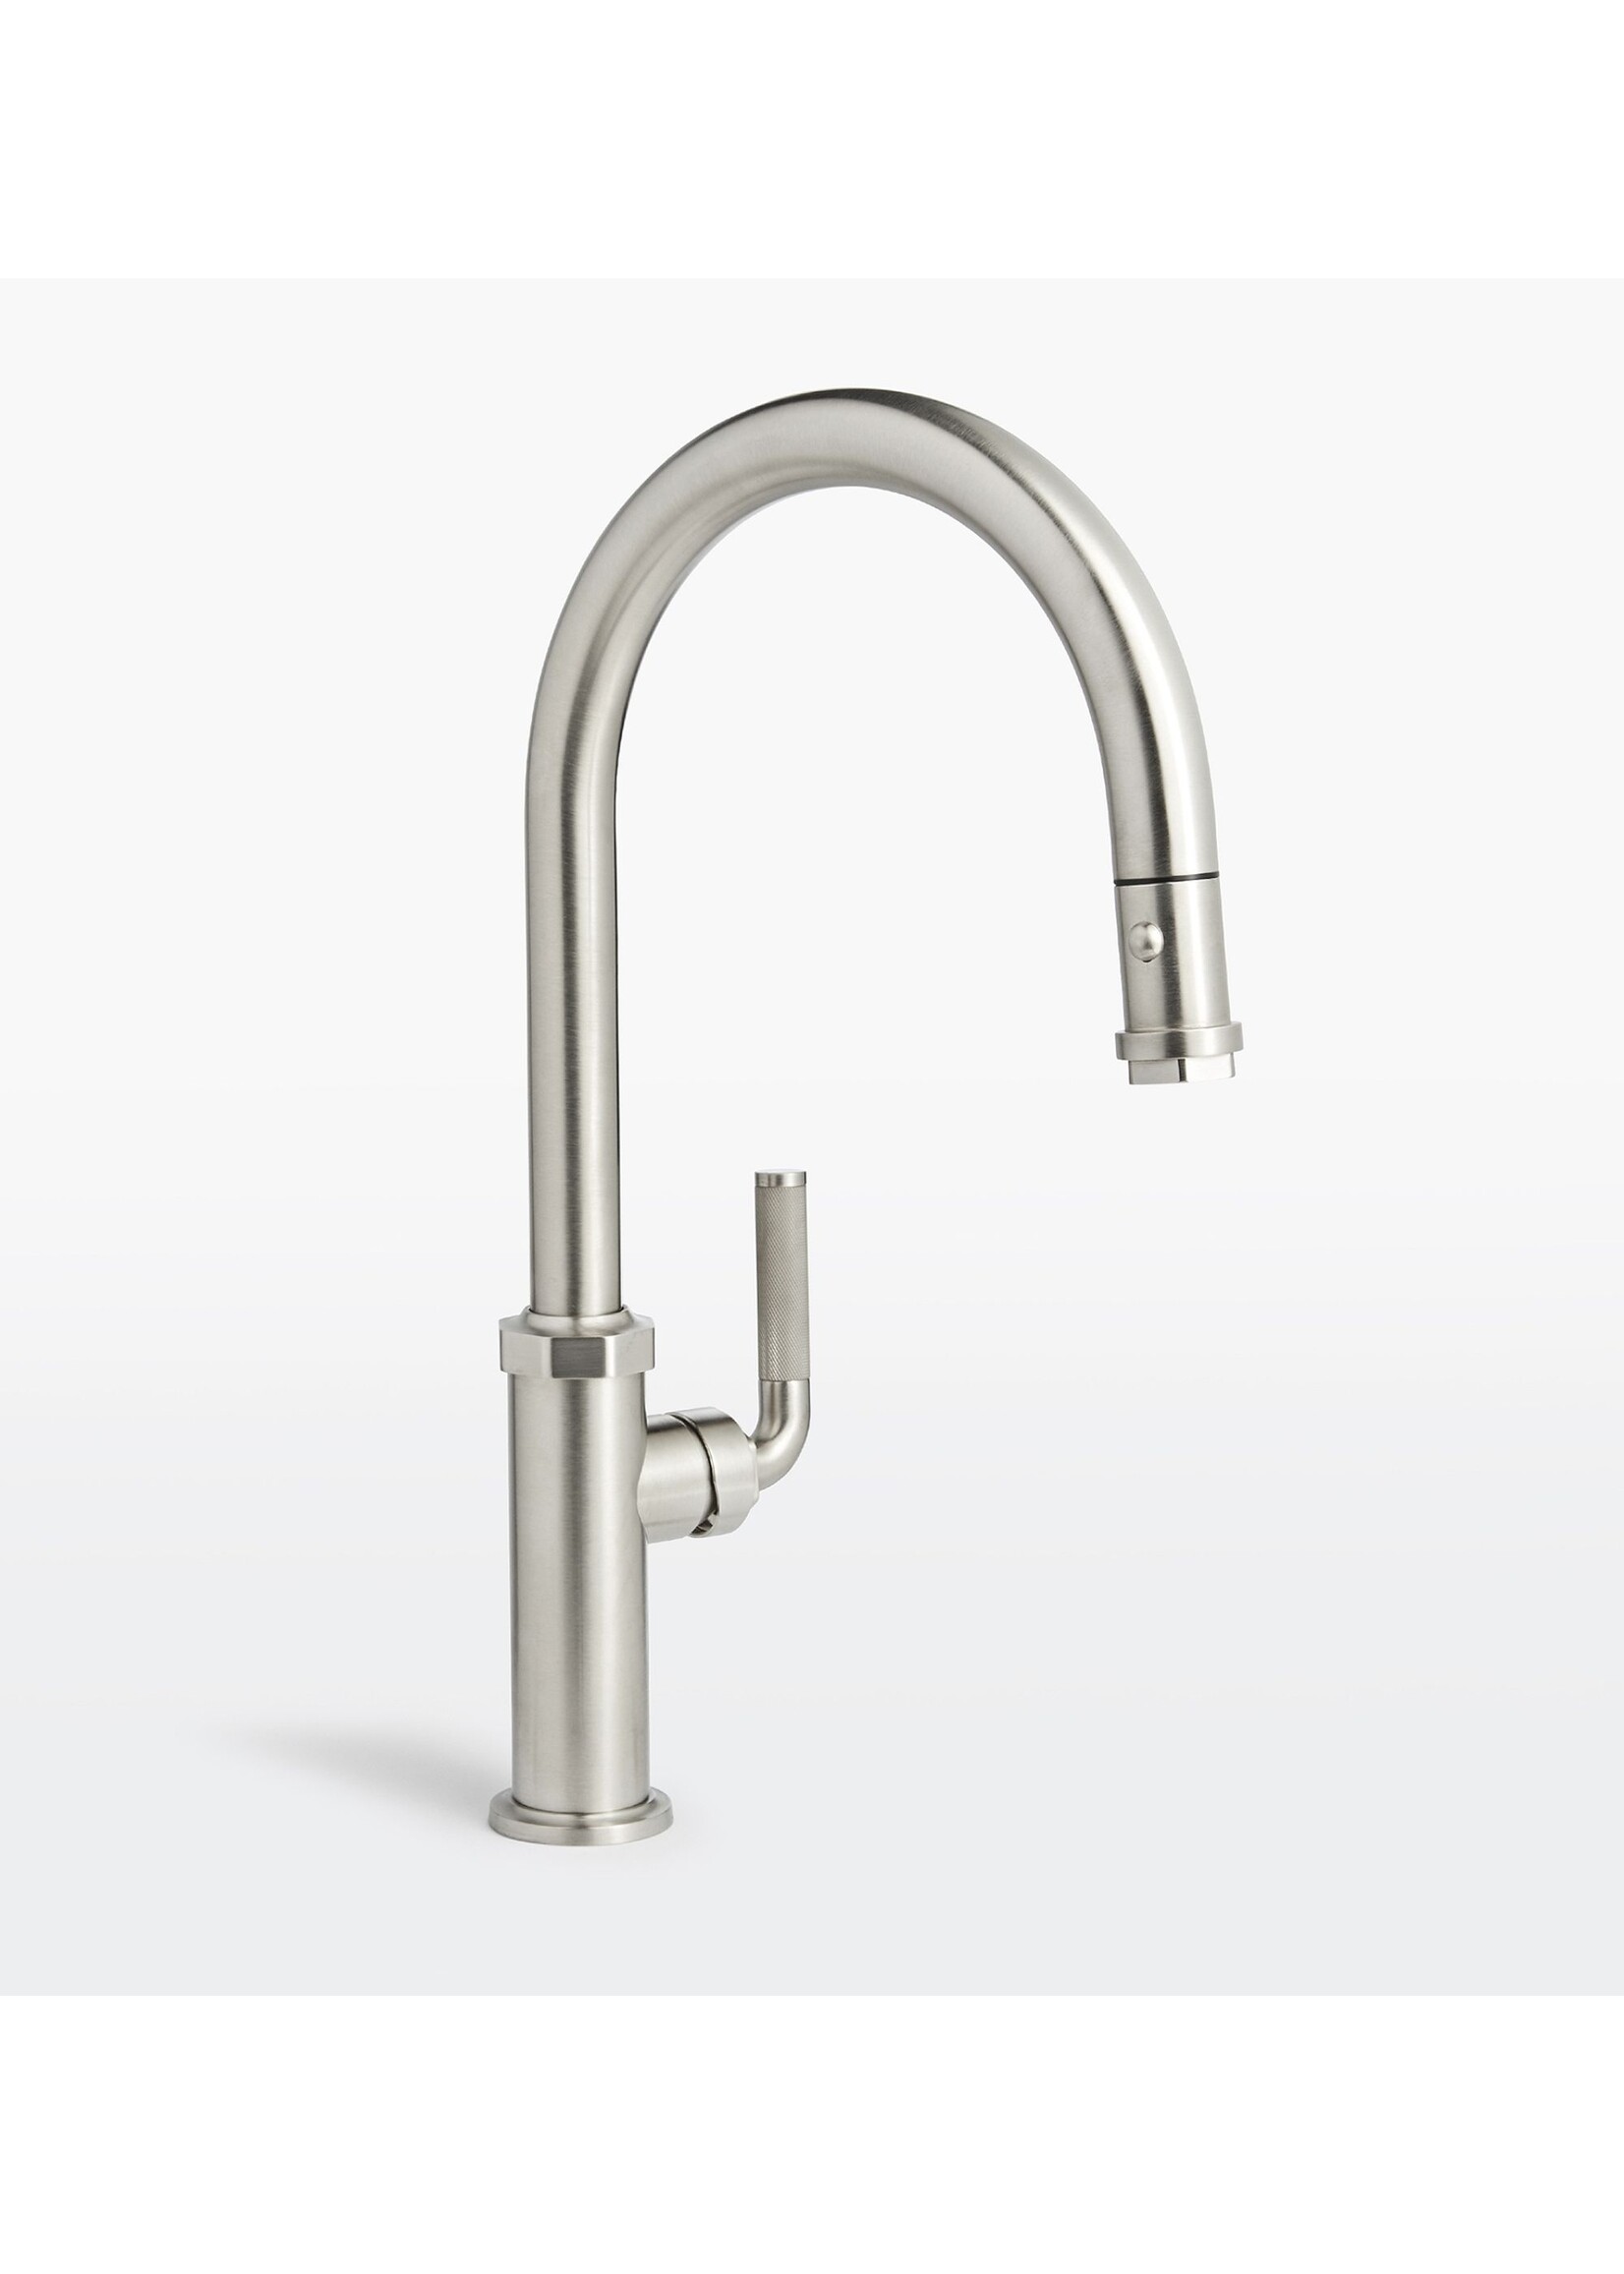 California Faucets California Faucets Descanso Pull- Down 18" High Arc Spout Kitchen Faucet w/ Button Sprayer - Standard Finish